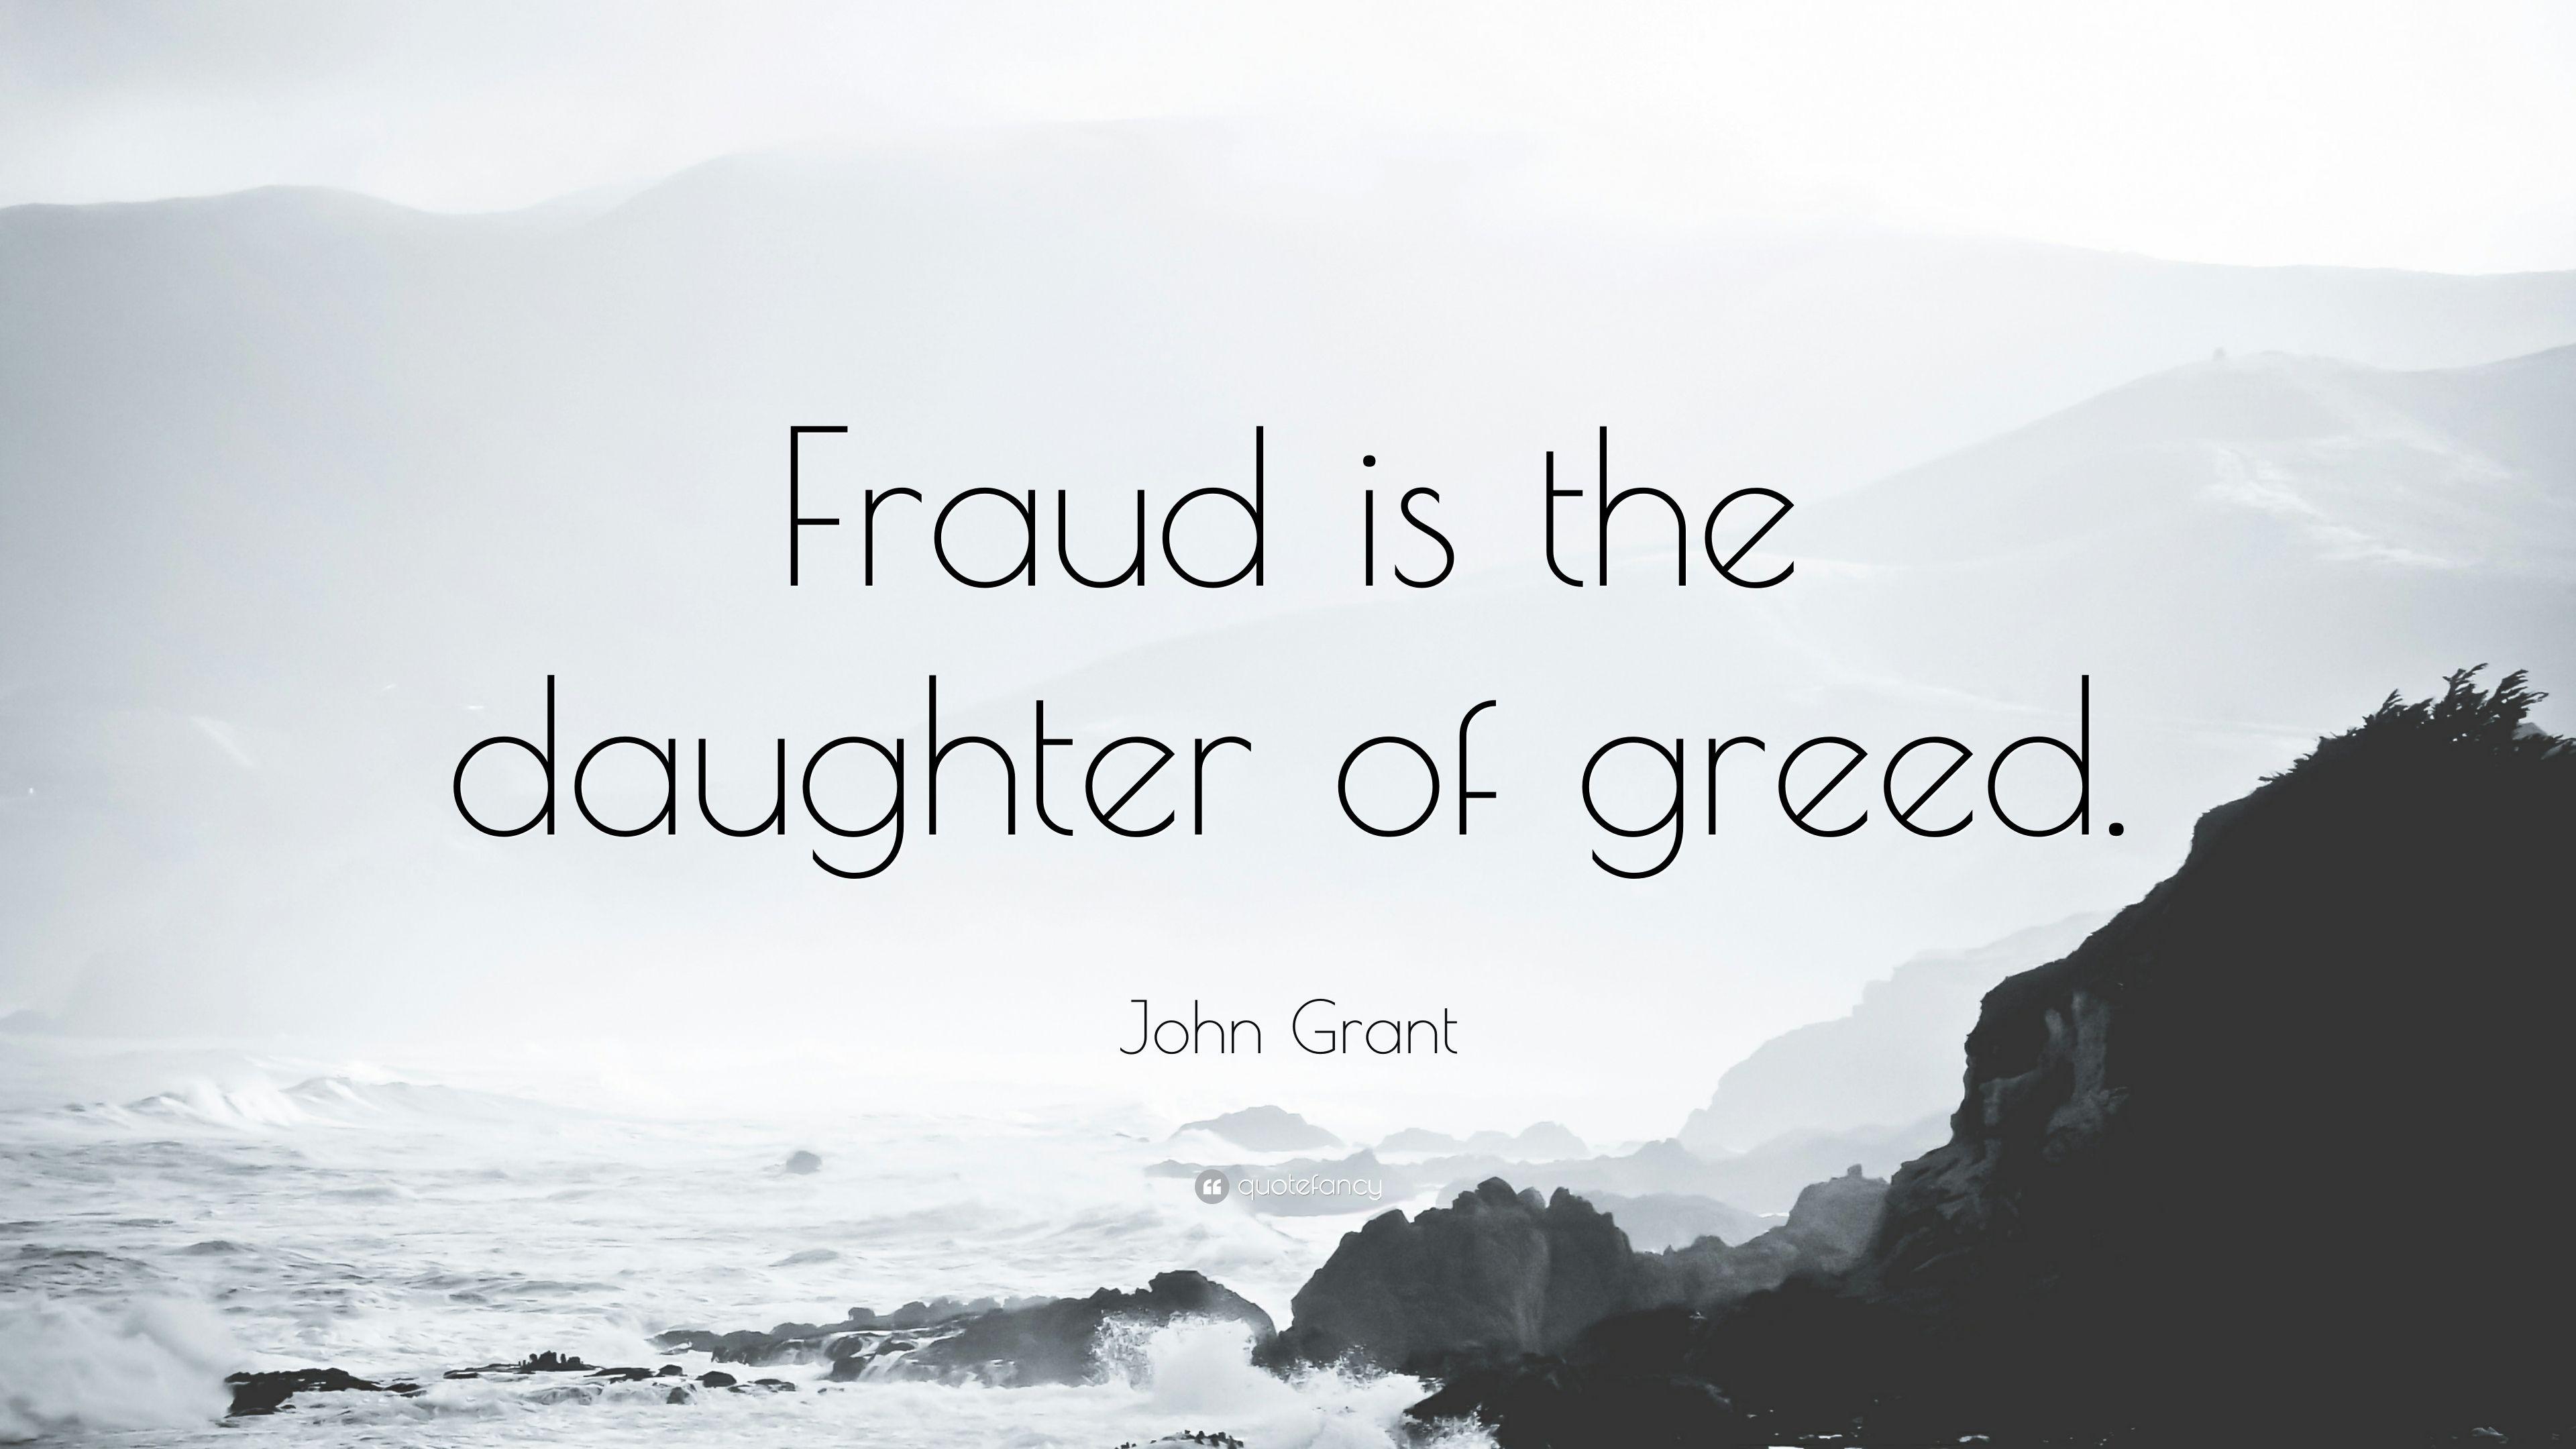 John Grant Quote: “Fraud is the daughter of greed.” 9 wallpaper